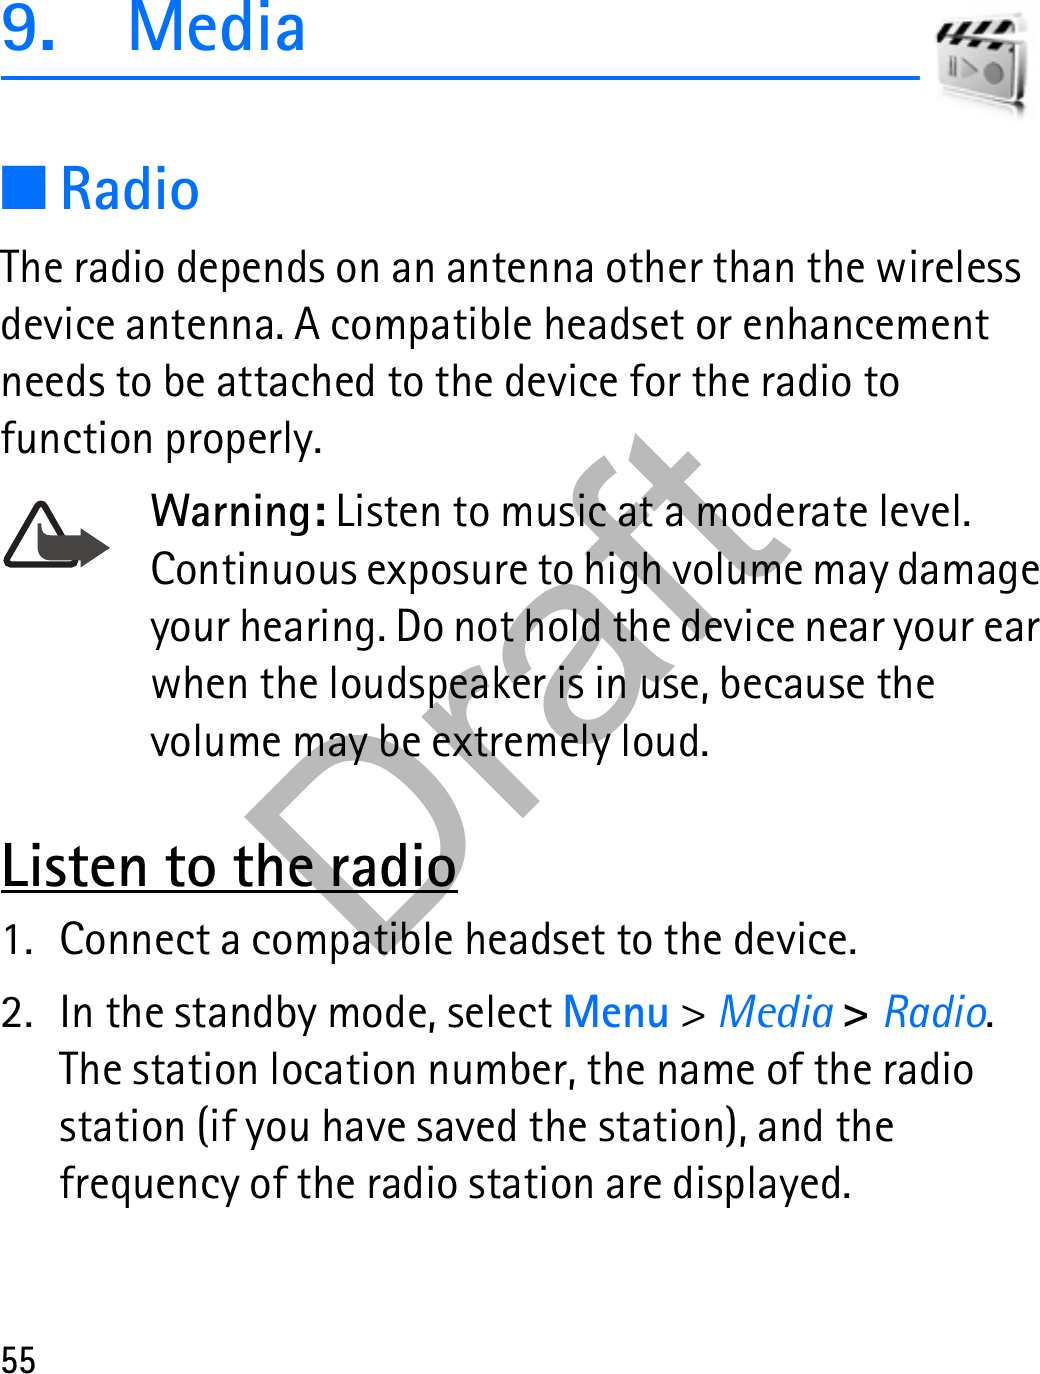 559. Media■RadioThe radio depends on an antenna other than the wireless device antenna. A compatible headset or enhancement needs to be attached to the device for the radio to function properly.Warning: Listen to music at a moderate level. Continuous exposure to high volume may damage your hearing. Do not hold the device near your ear when the loudspeaker is in use, because the volume may be extremely loud.Listen to the radio1. Connect a compatible headset to the device.2. In the standby mode, select Menu &gt; Media &gt; Radio. The station location number, the name of the radio station (if you have saved the station), and the frequency of the radio station are displayed.Draft